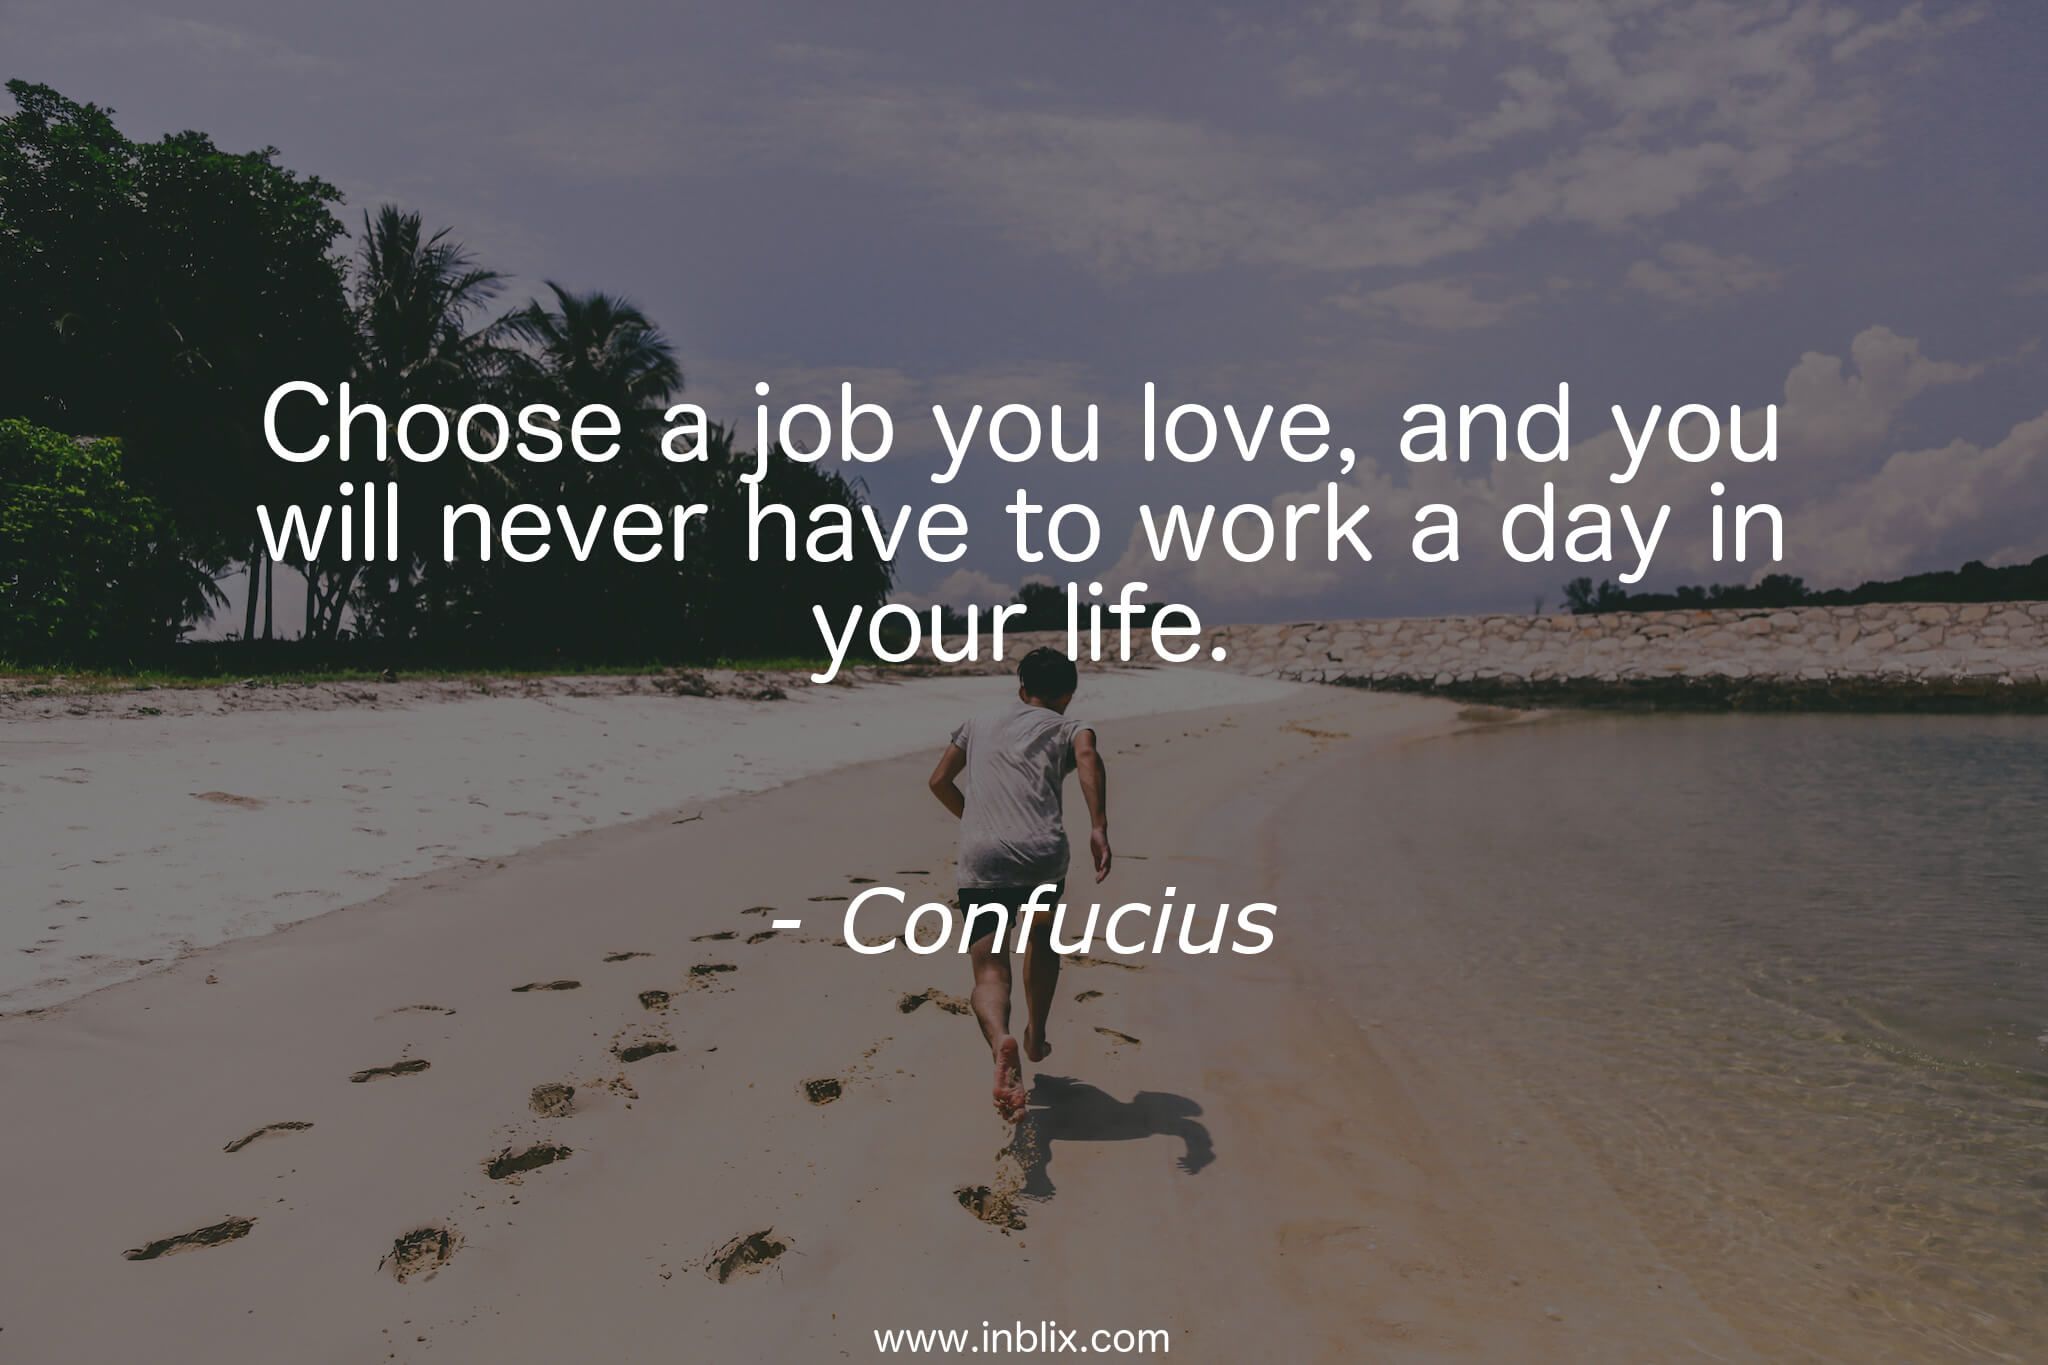 My choose my life. Choose a job you Love, and you will never have to work a Day in your Life. Choose a job you Love. Find a job you enjoy doing, and you will never have to work a Day in your Life.. Day in your Life.